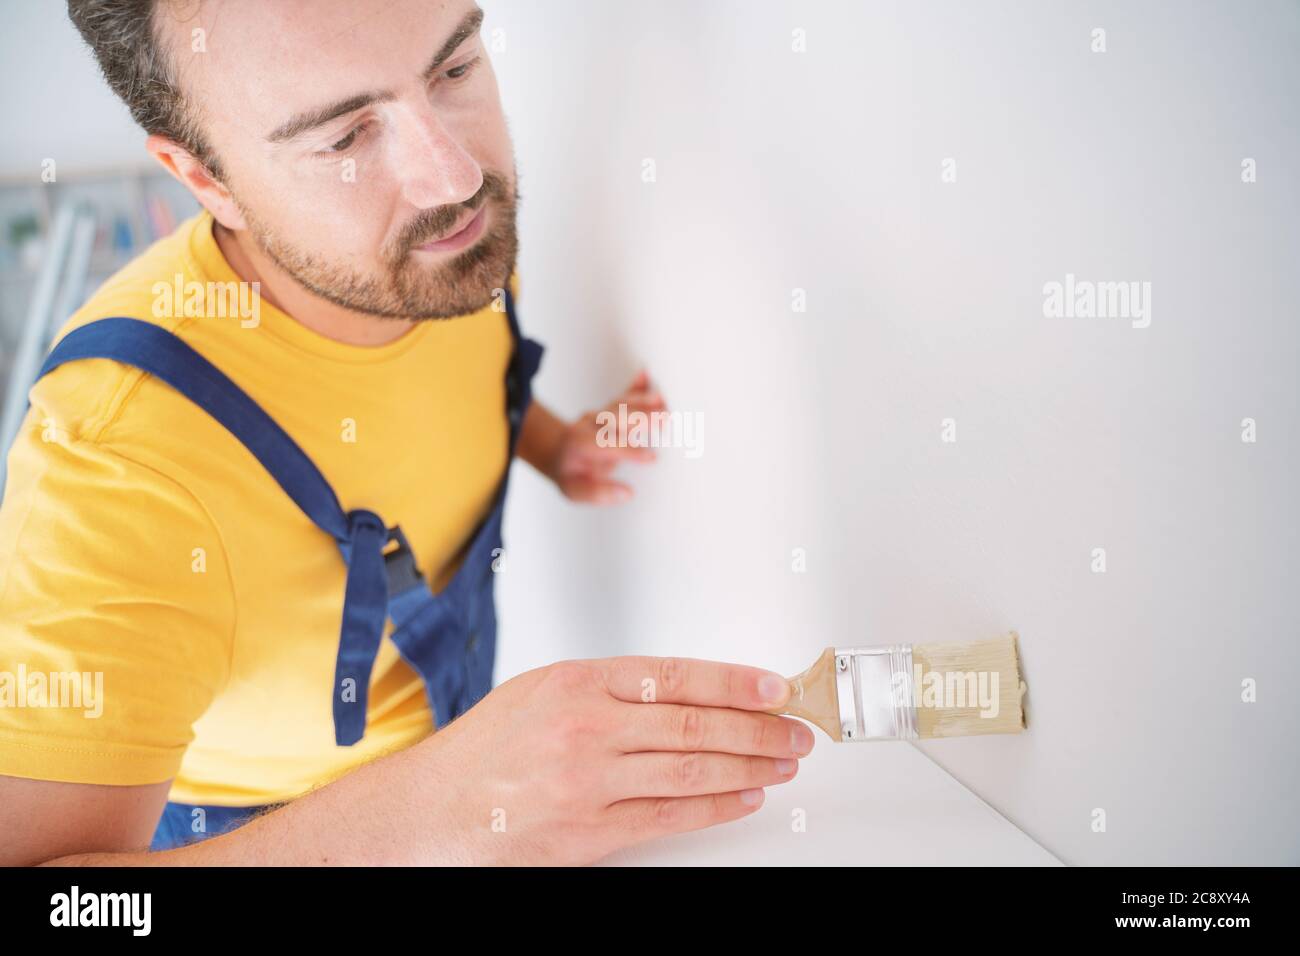 Painter working at home with painting tools Stock Photo